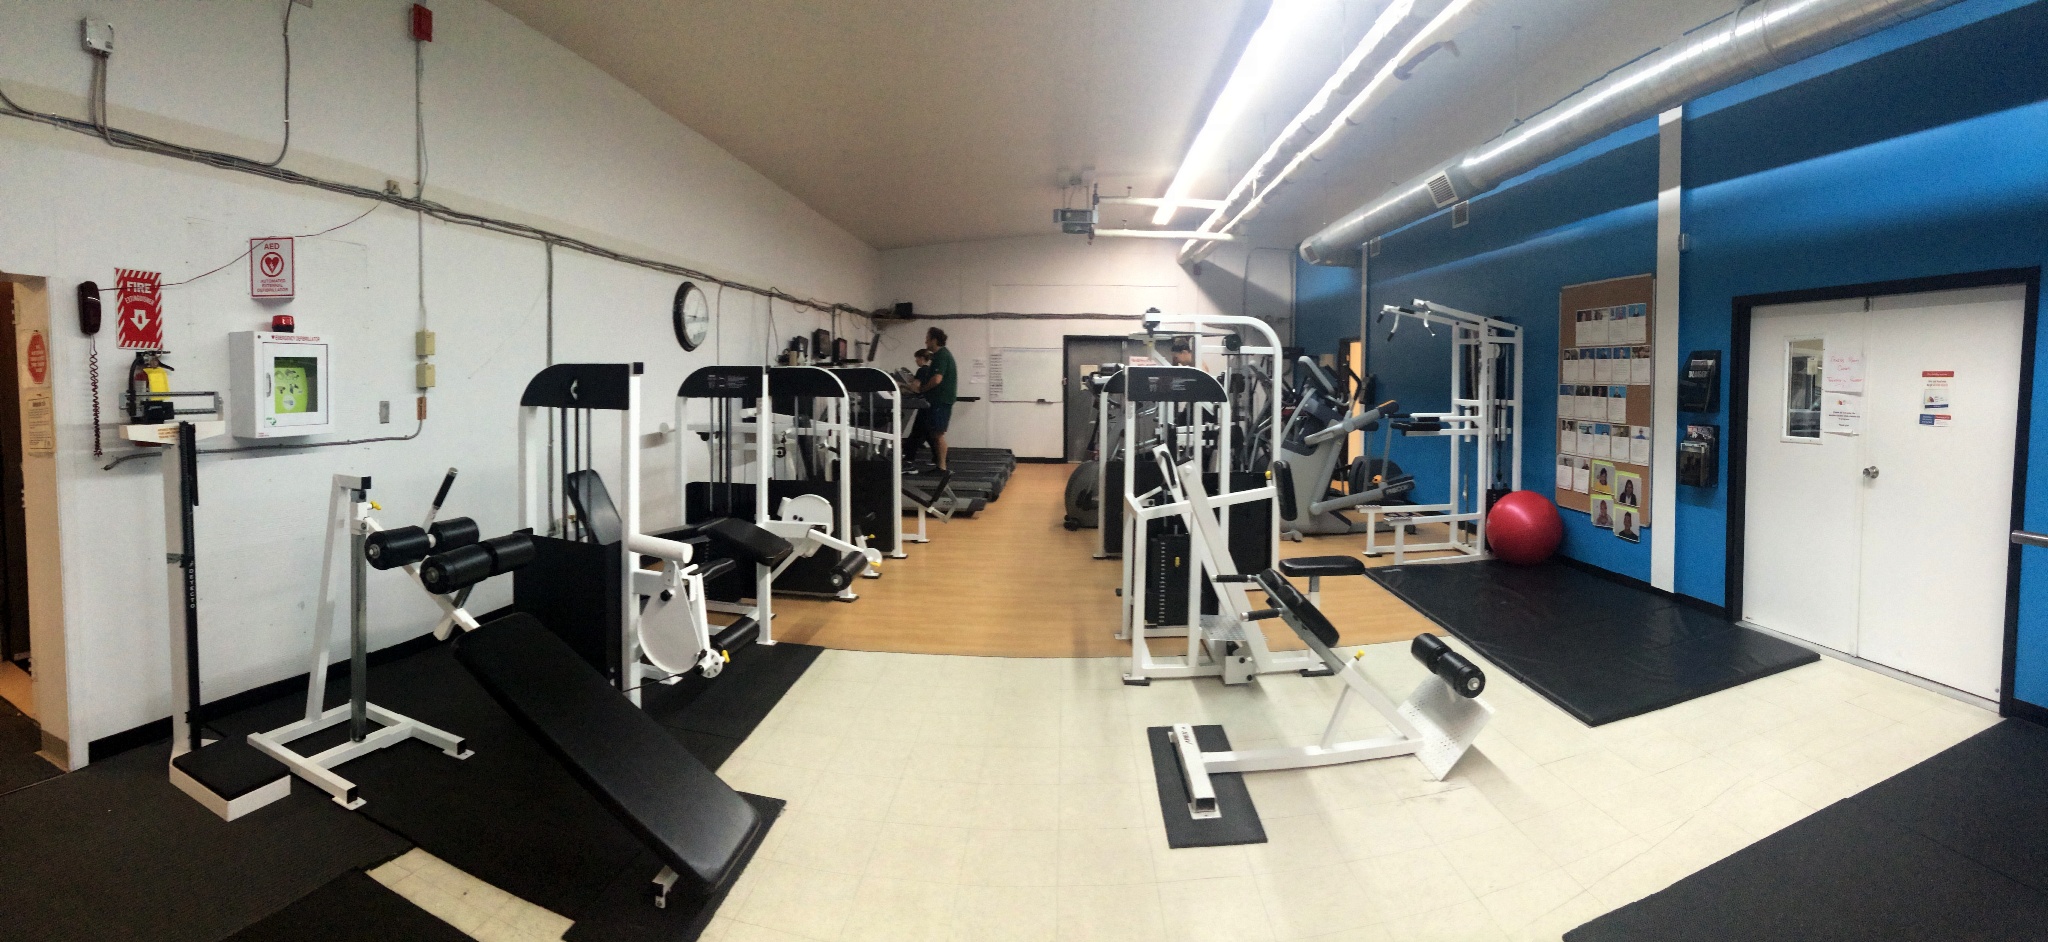 More weight equipment and cardio machines in Atii Fitness Centre's space.